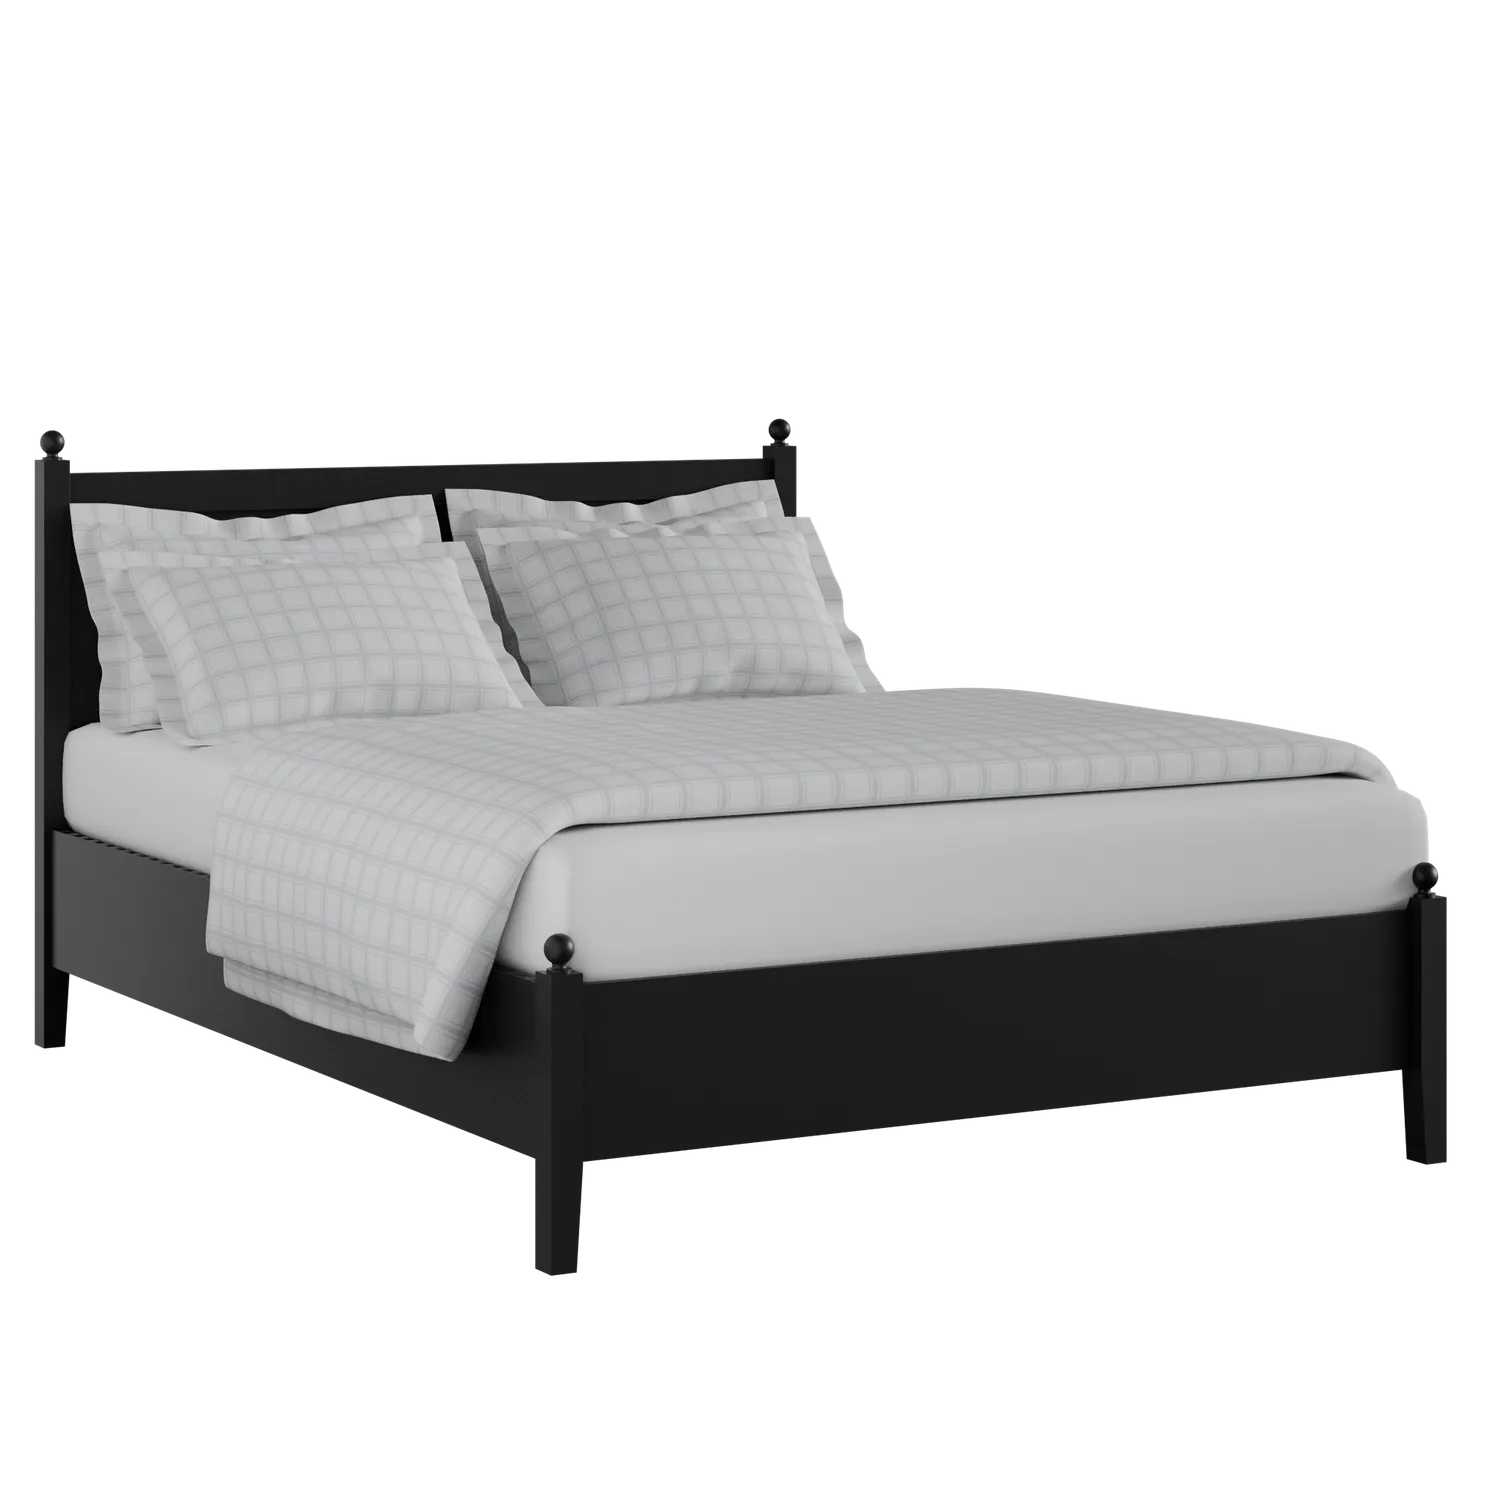 Marbella Low Footend Painted painted wood bed in black with Juno mattress